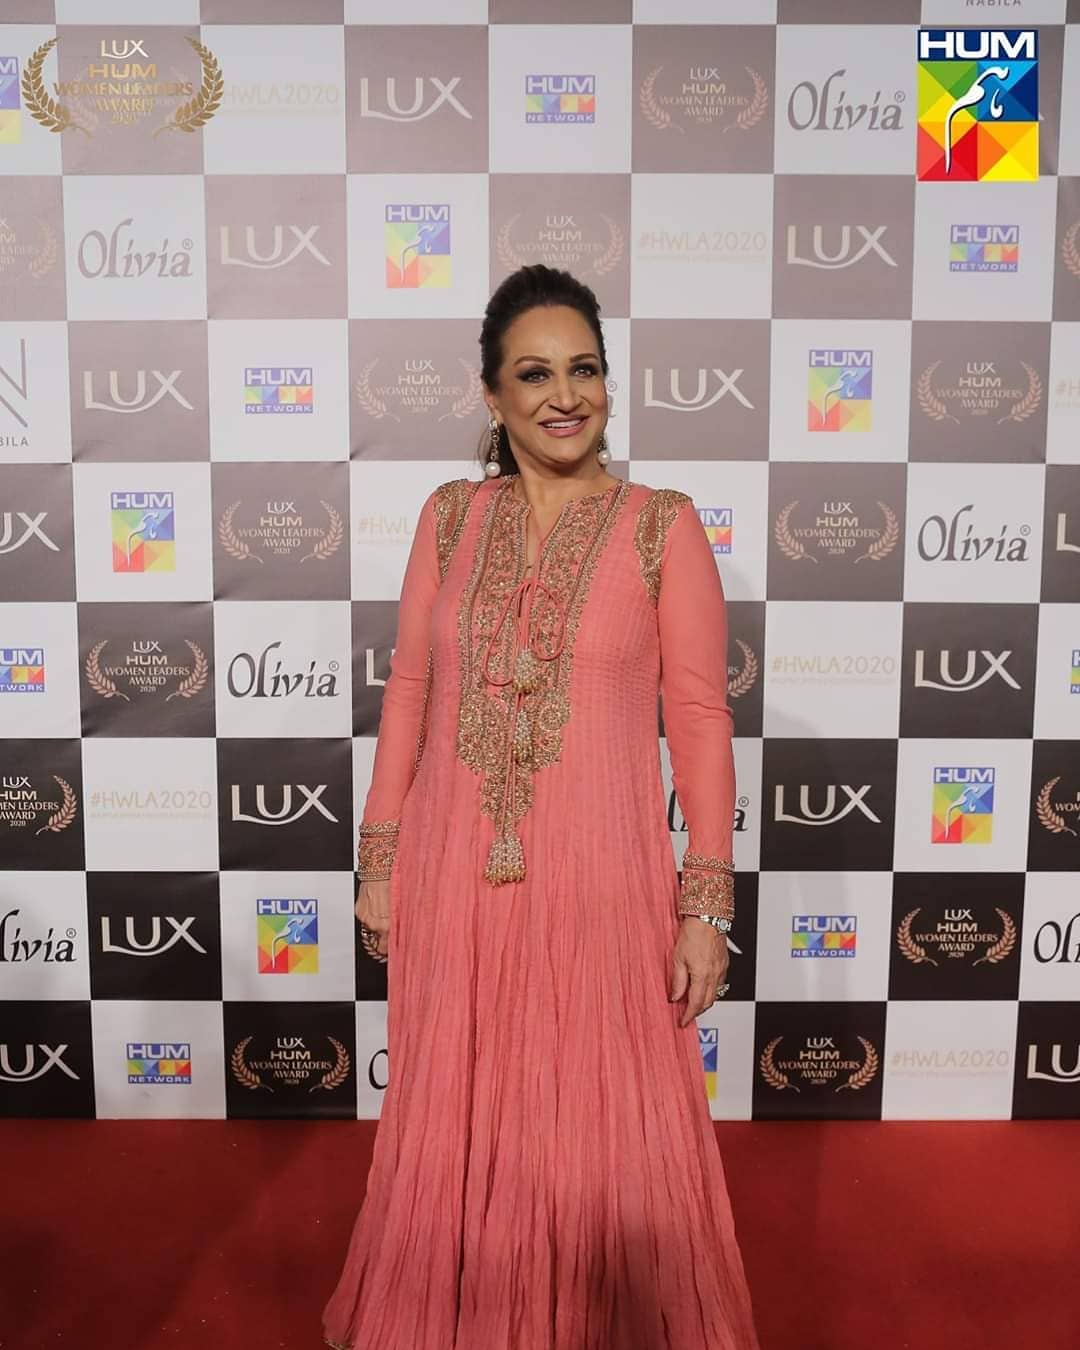 Pakistani Celebrities Spotted at HUM Women Leaders Awards 2020